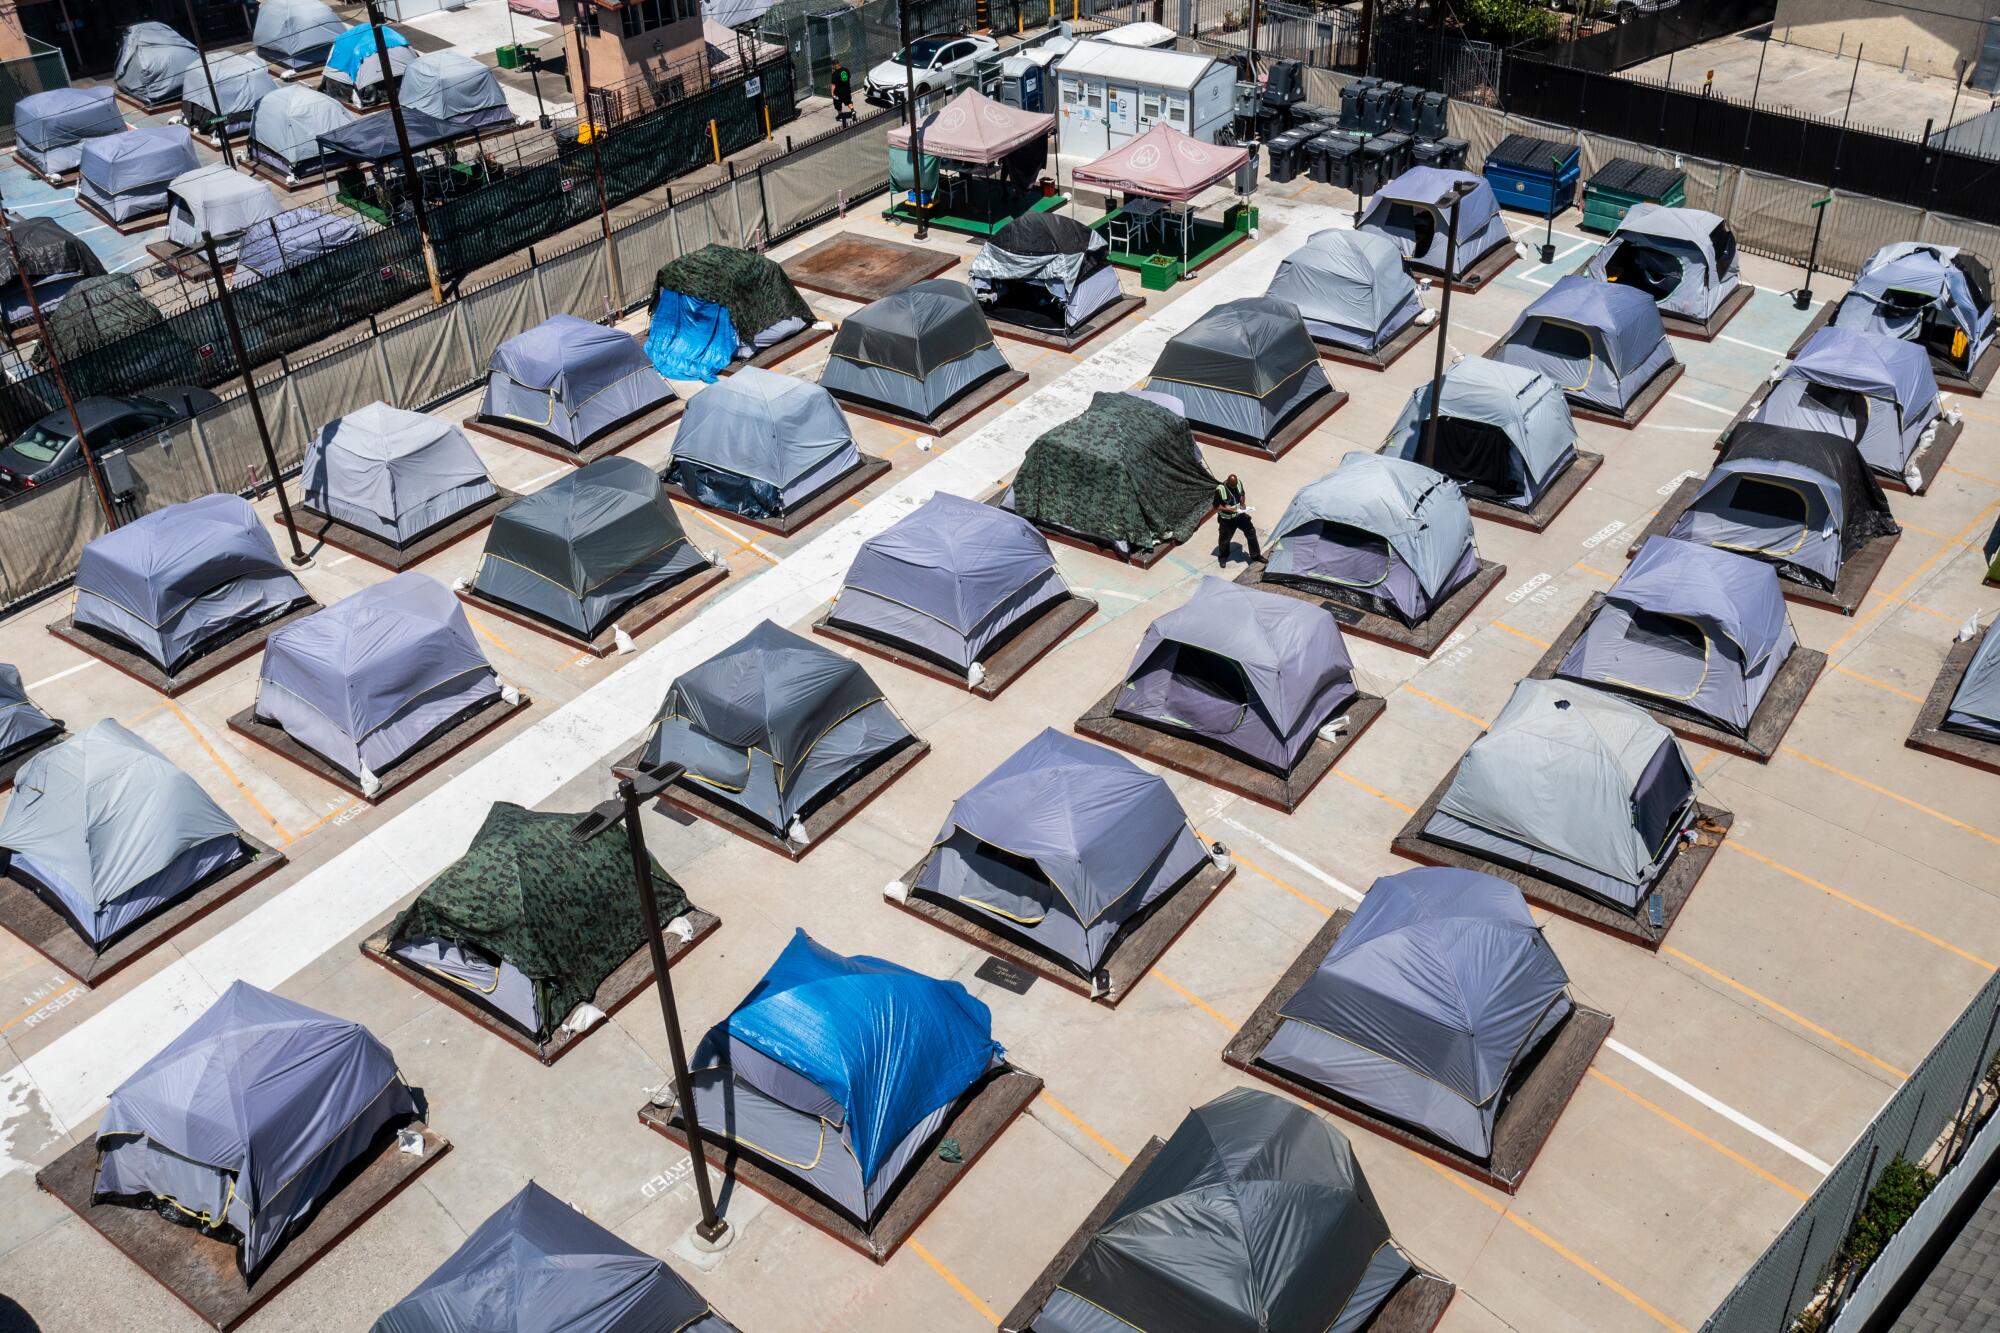 An aerial view of tents neatly lined in rows